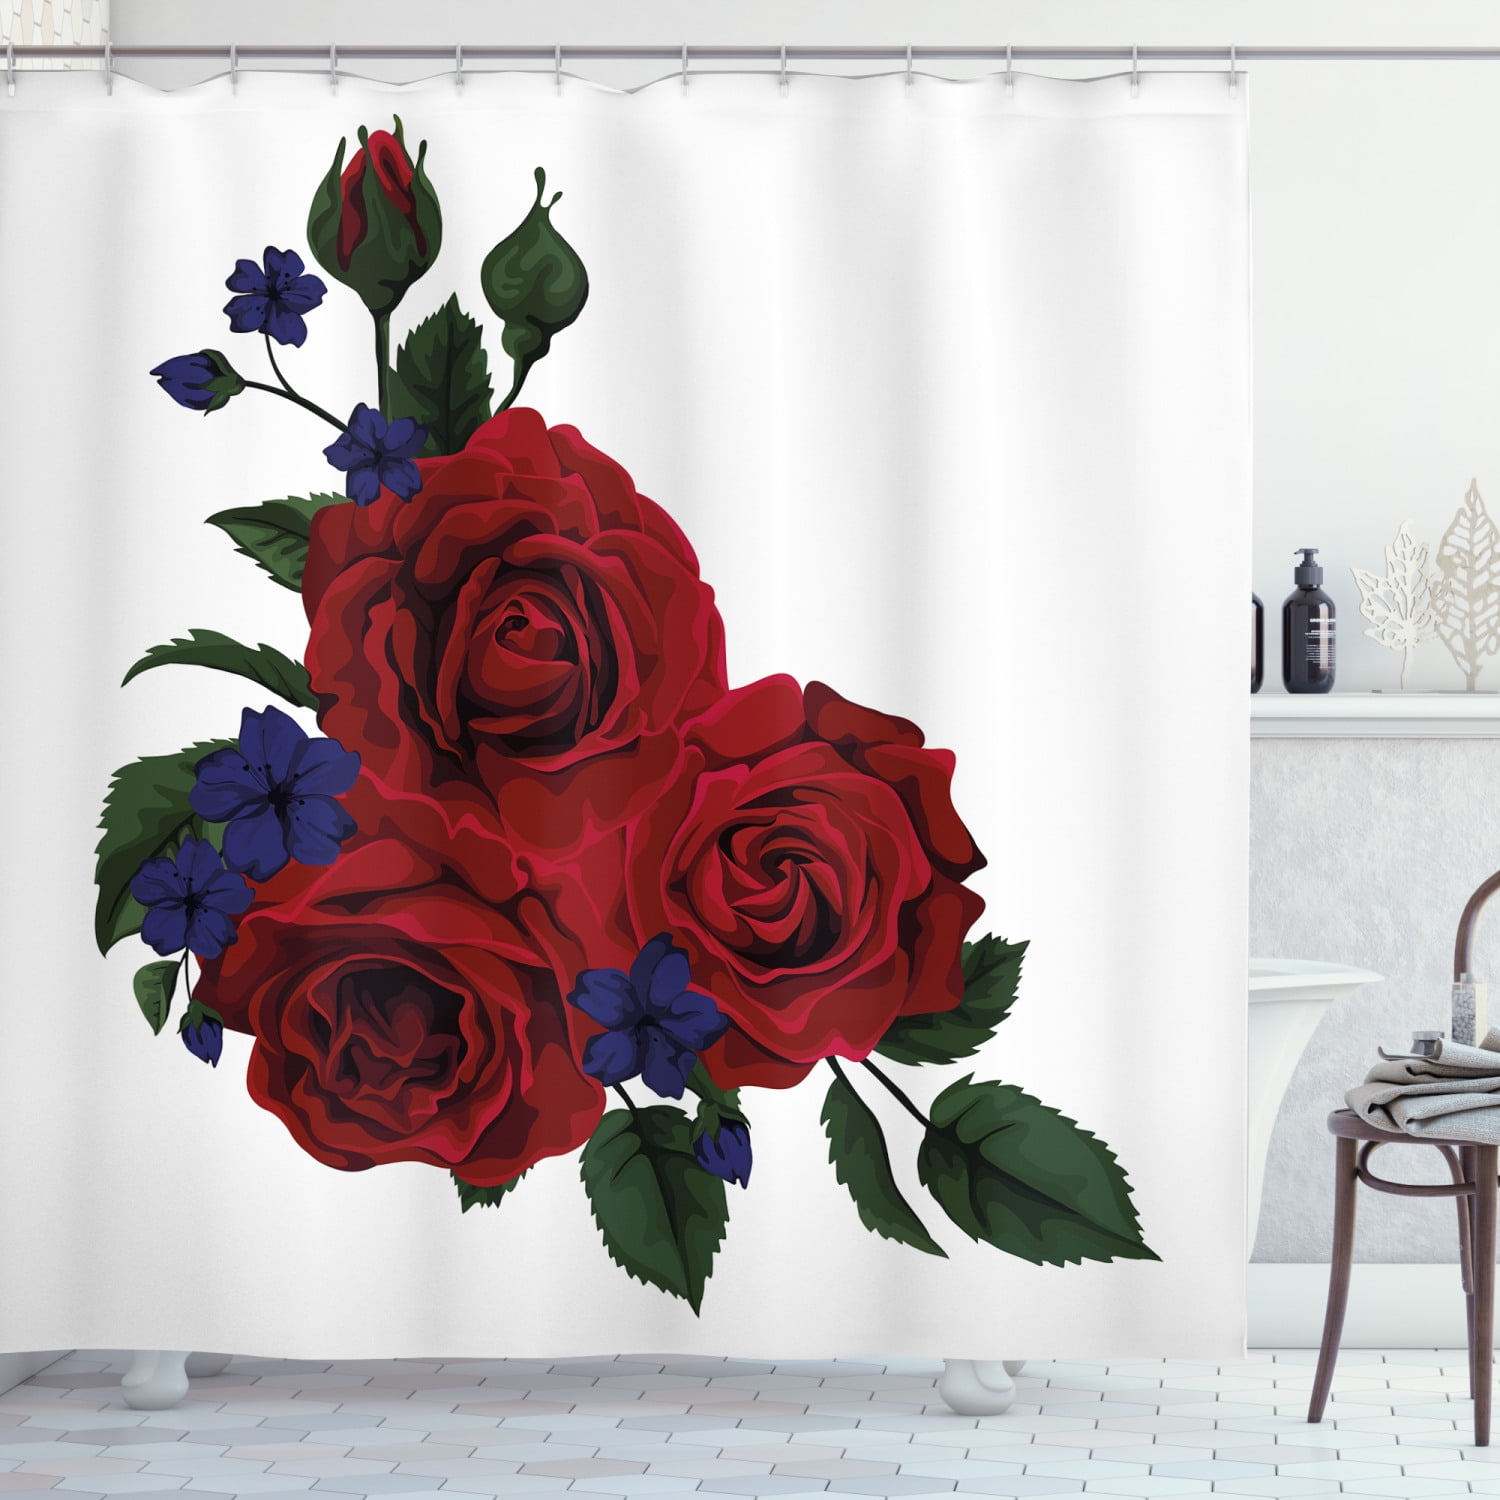 72x72" Rose Flowers Bouquet Bathroom Fabric Shower Curtain Liner Set With Hooks 